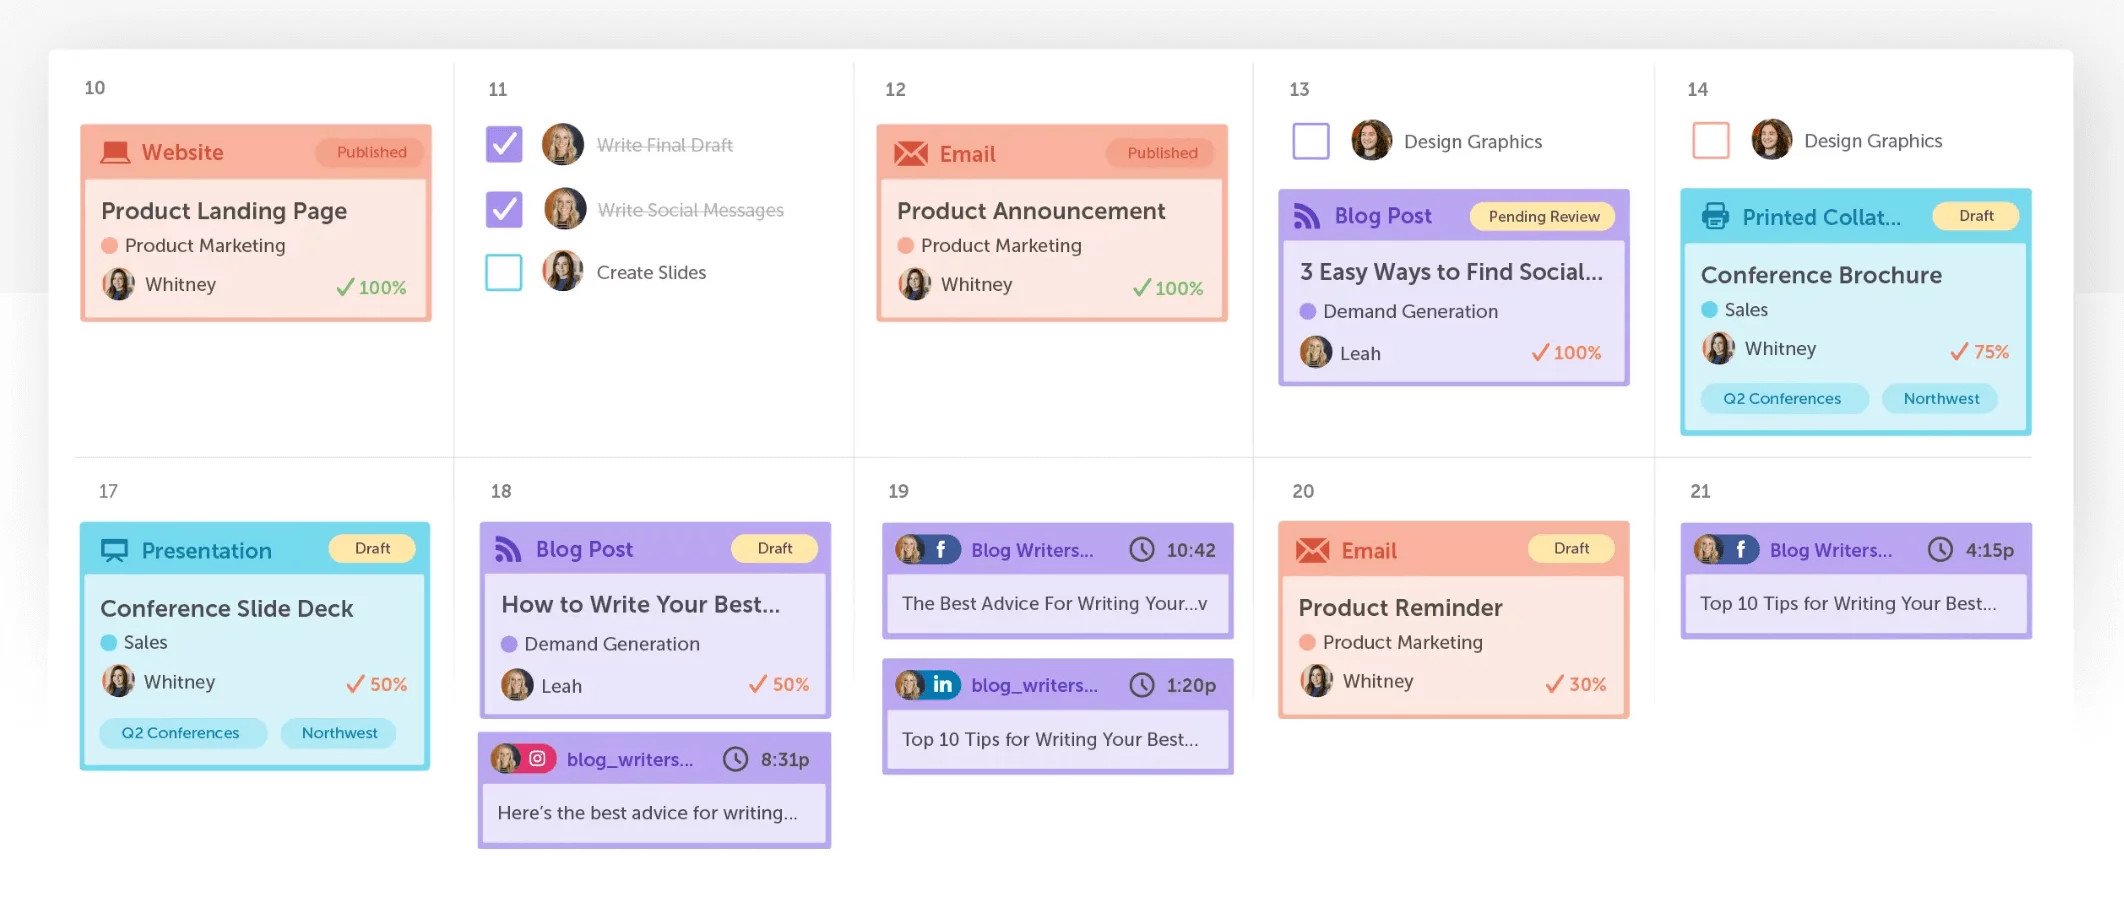 Coschedule calendar for marketing and social media management.